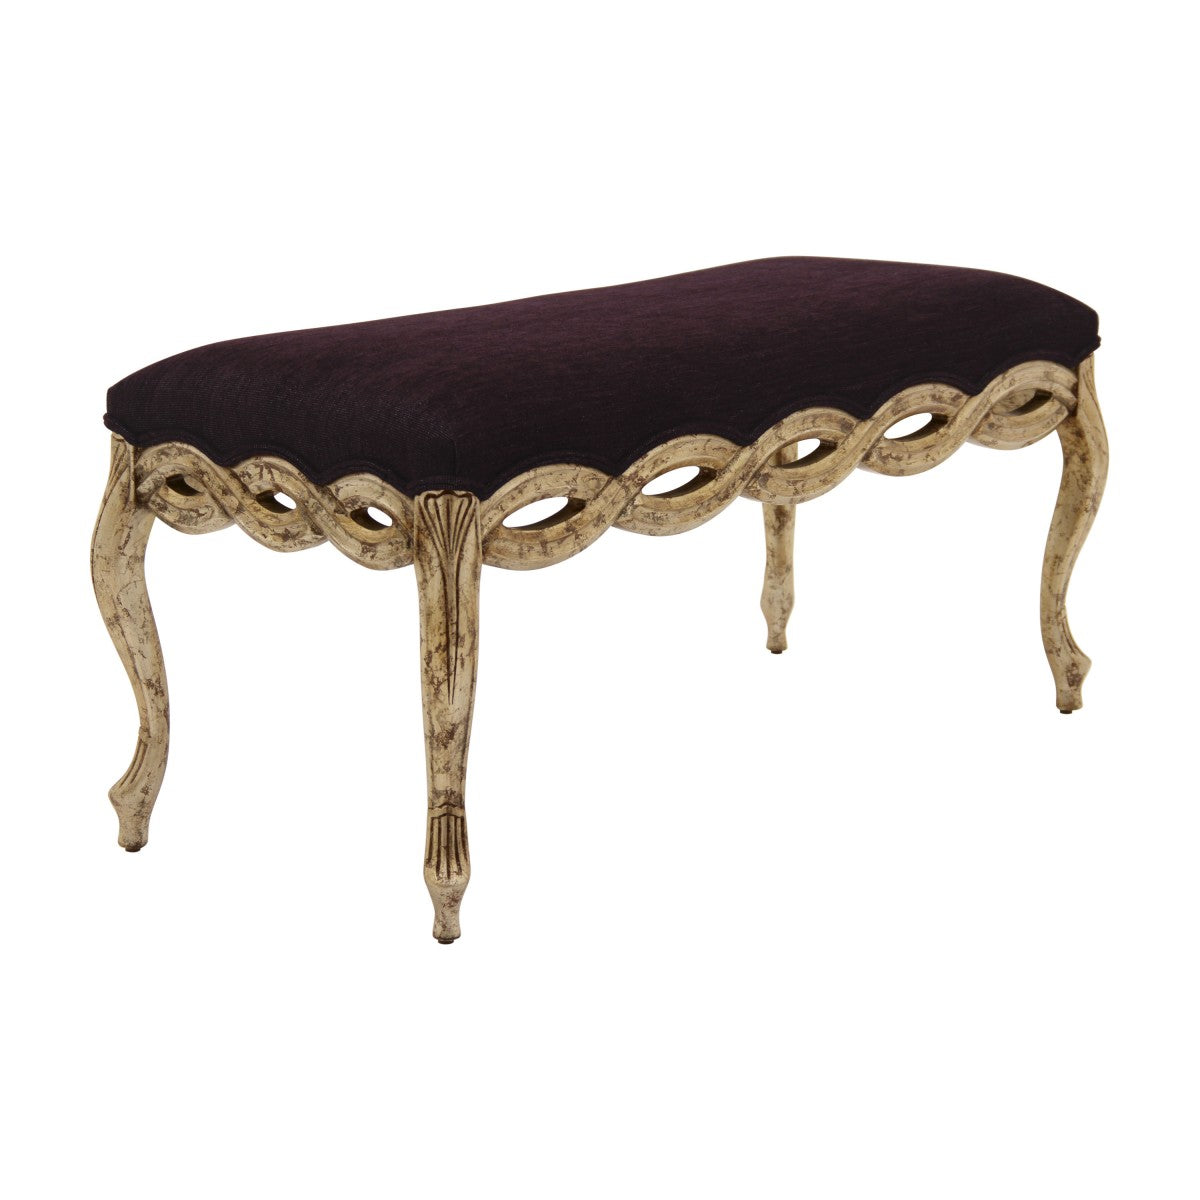 Intreccio Bespoke Upholstered Luxury Carved Statement Bench MS310Q Custom Made To Order